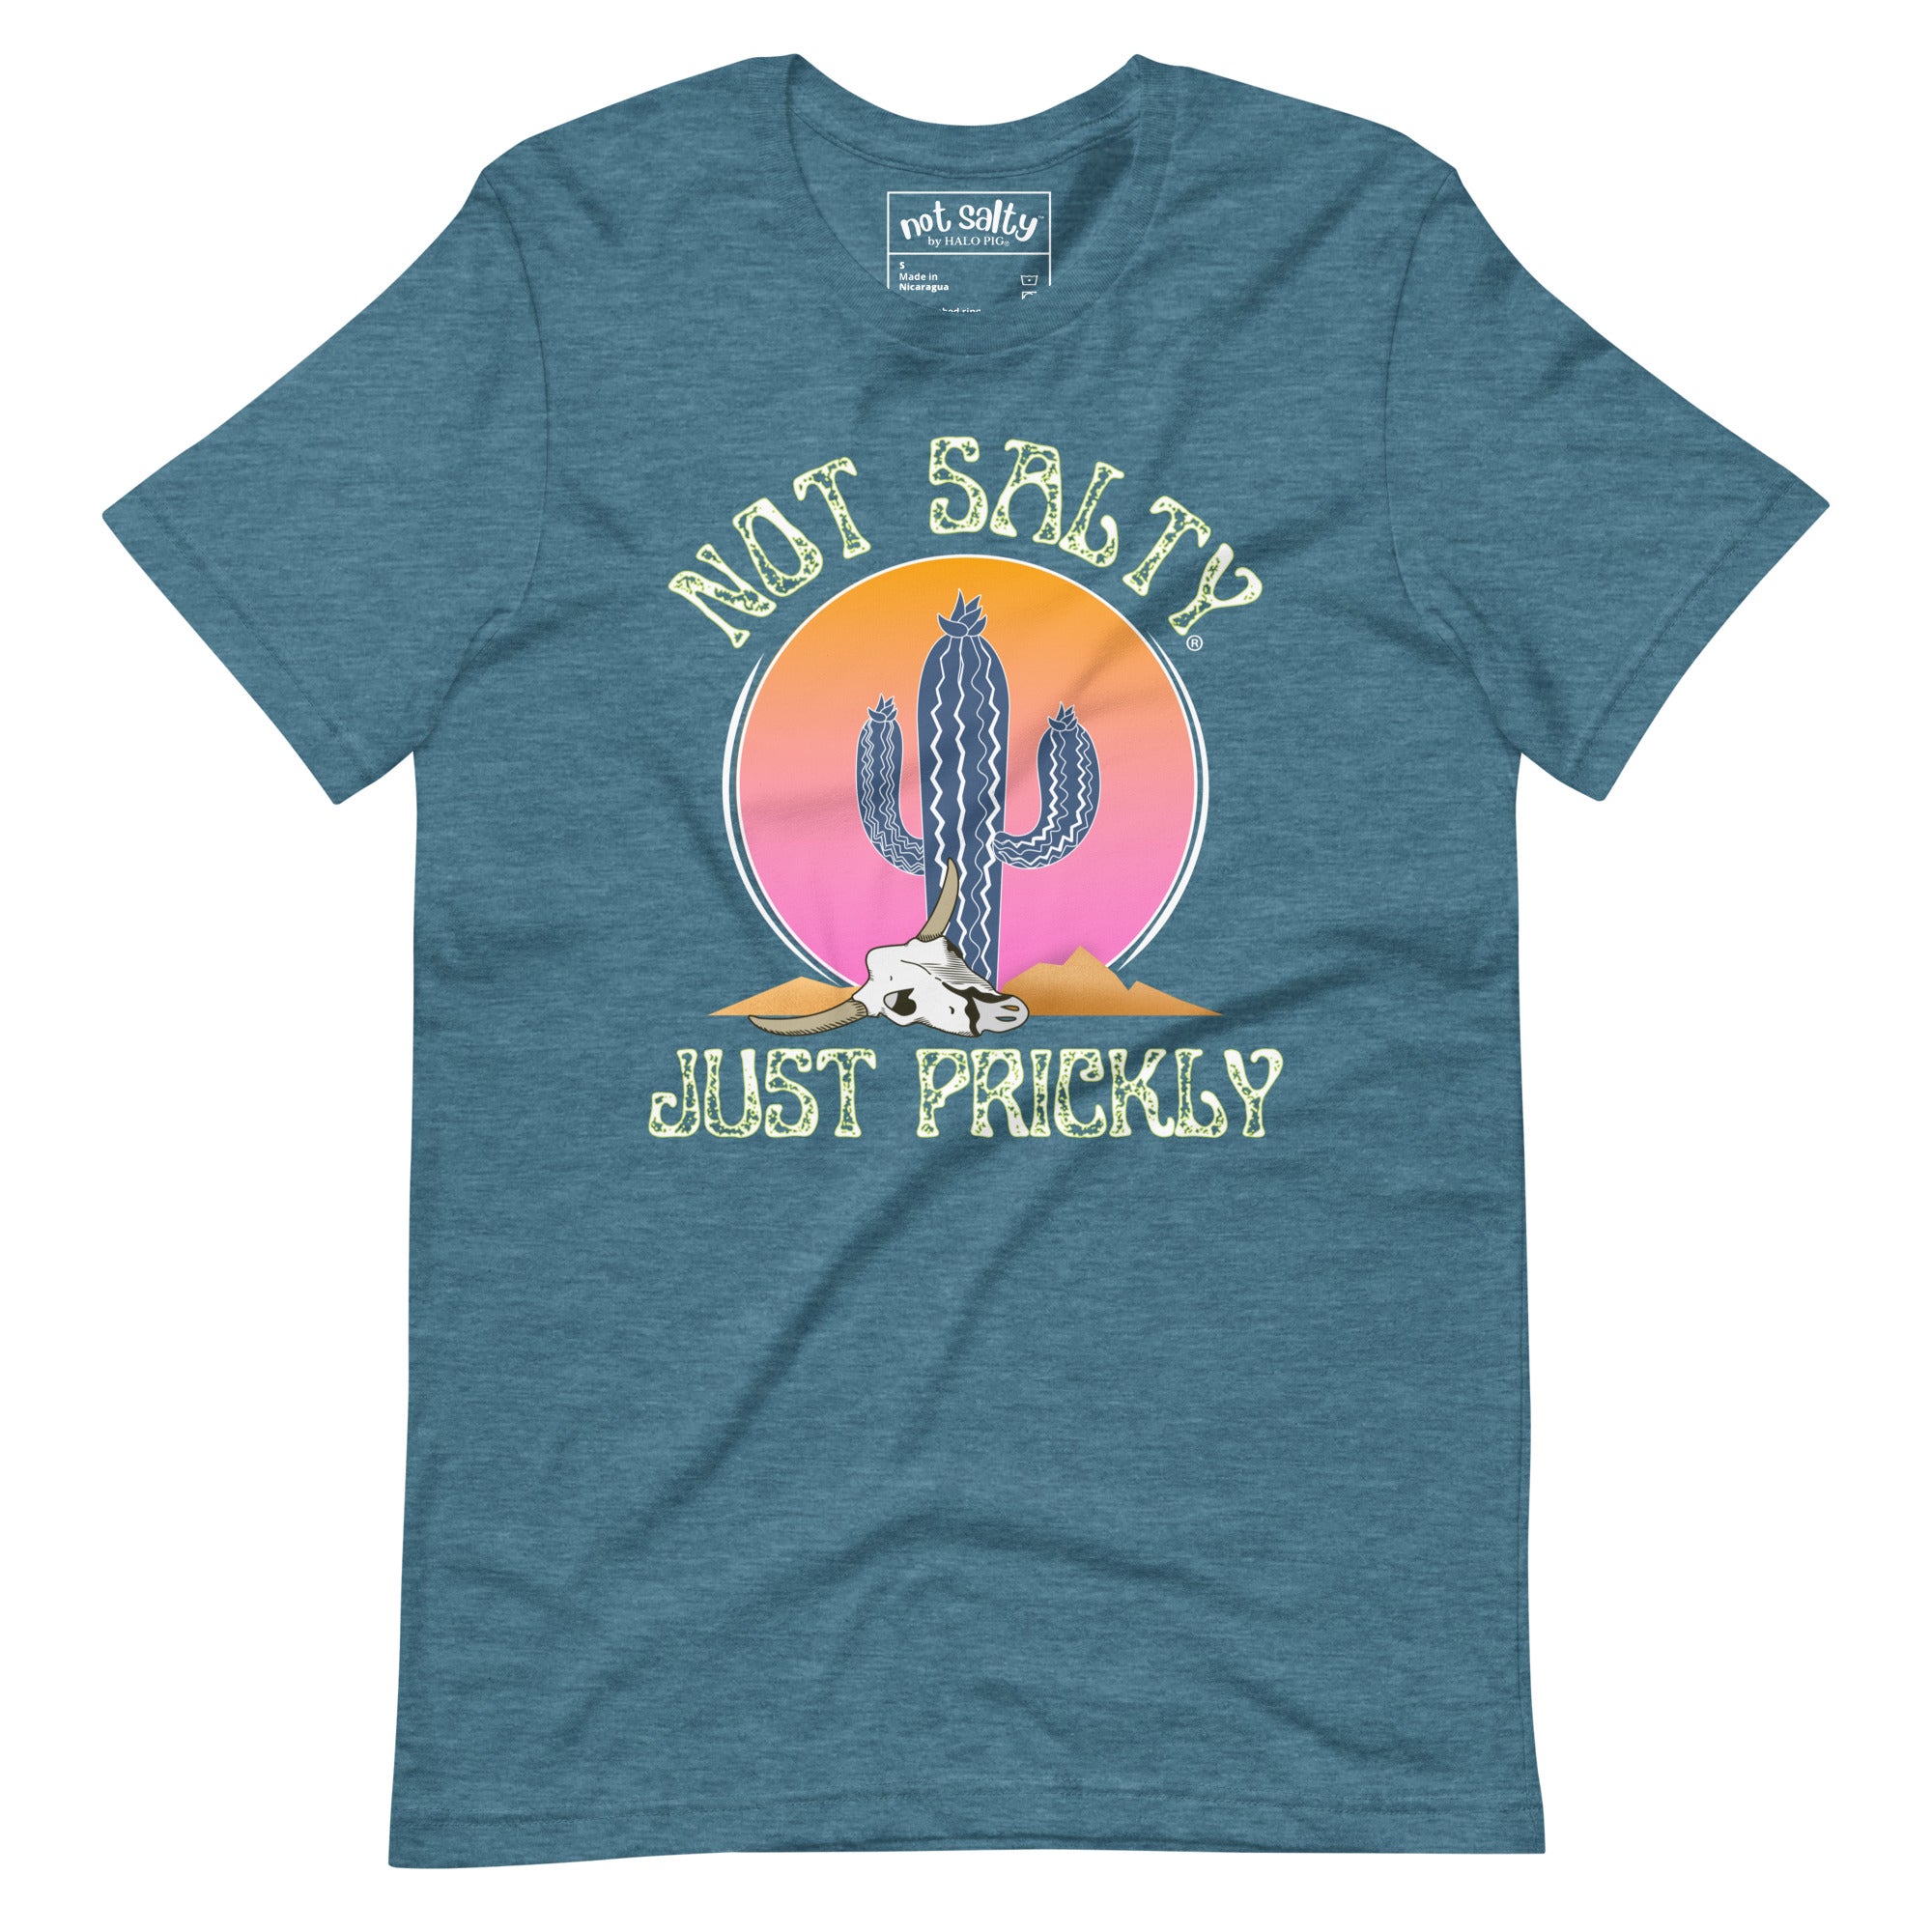 Not Salty "Just Prickly" Men's/Unisex T-Shirt